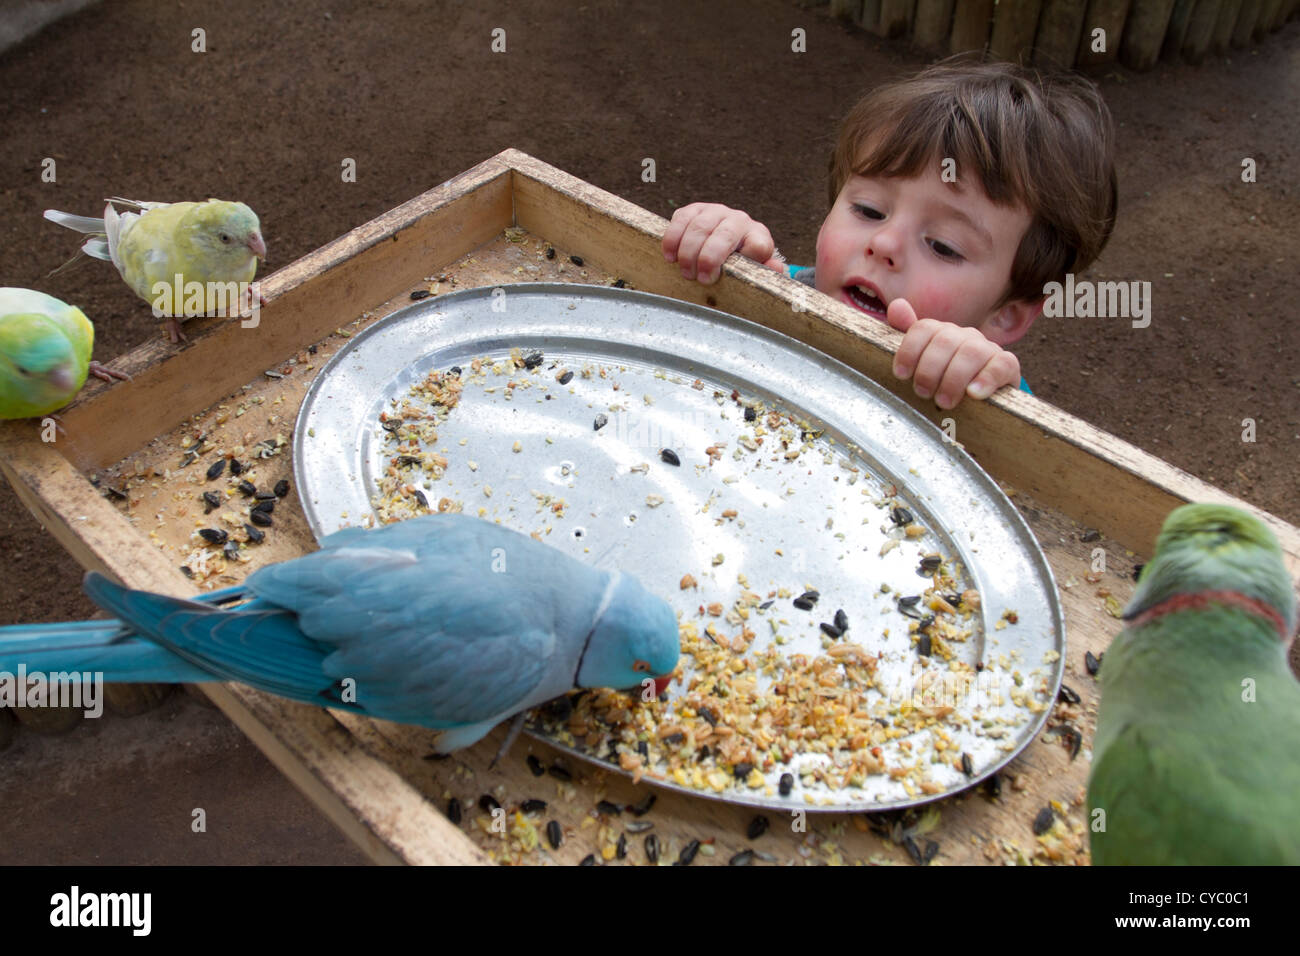 A 3-year old boy looks at exotic birds feeding. Stock Photo